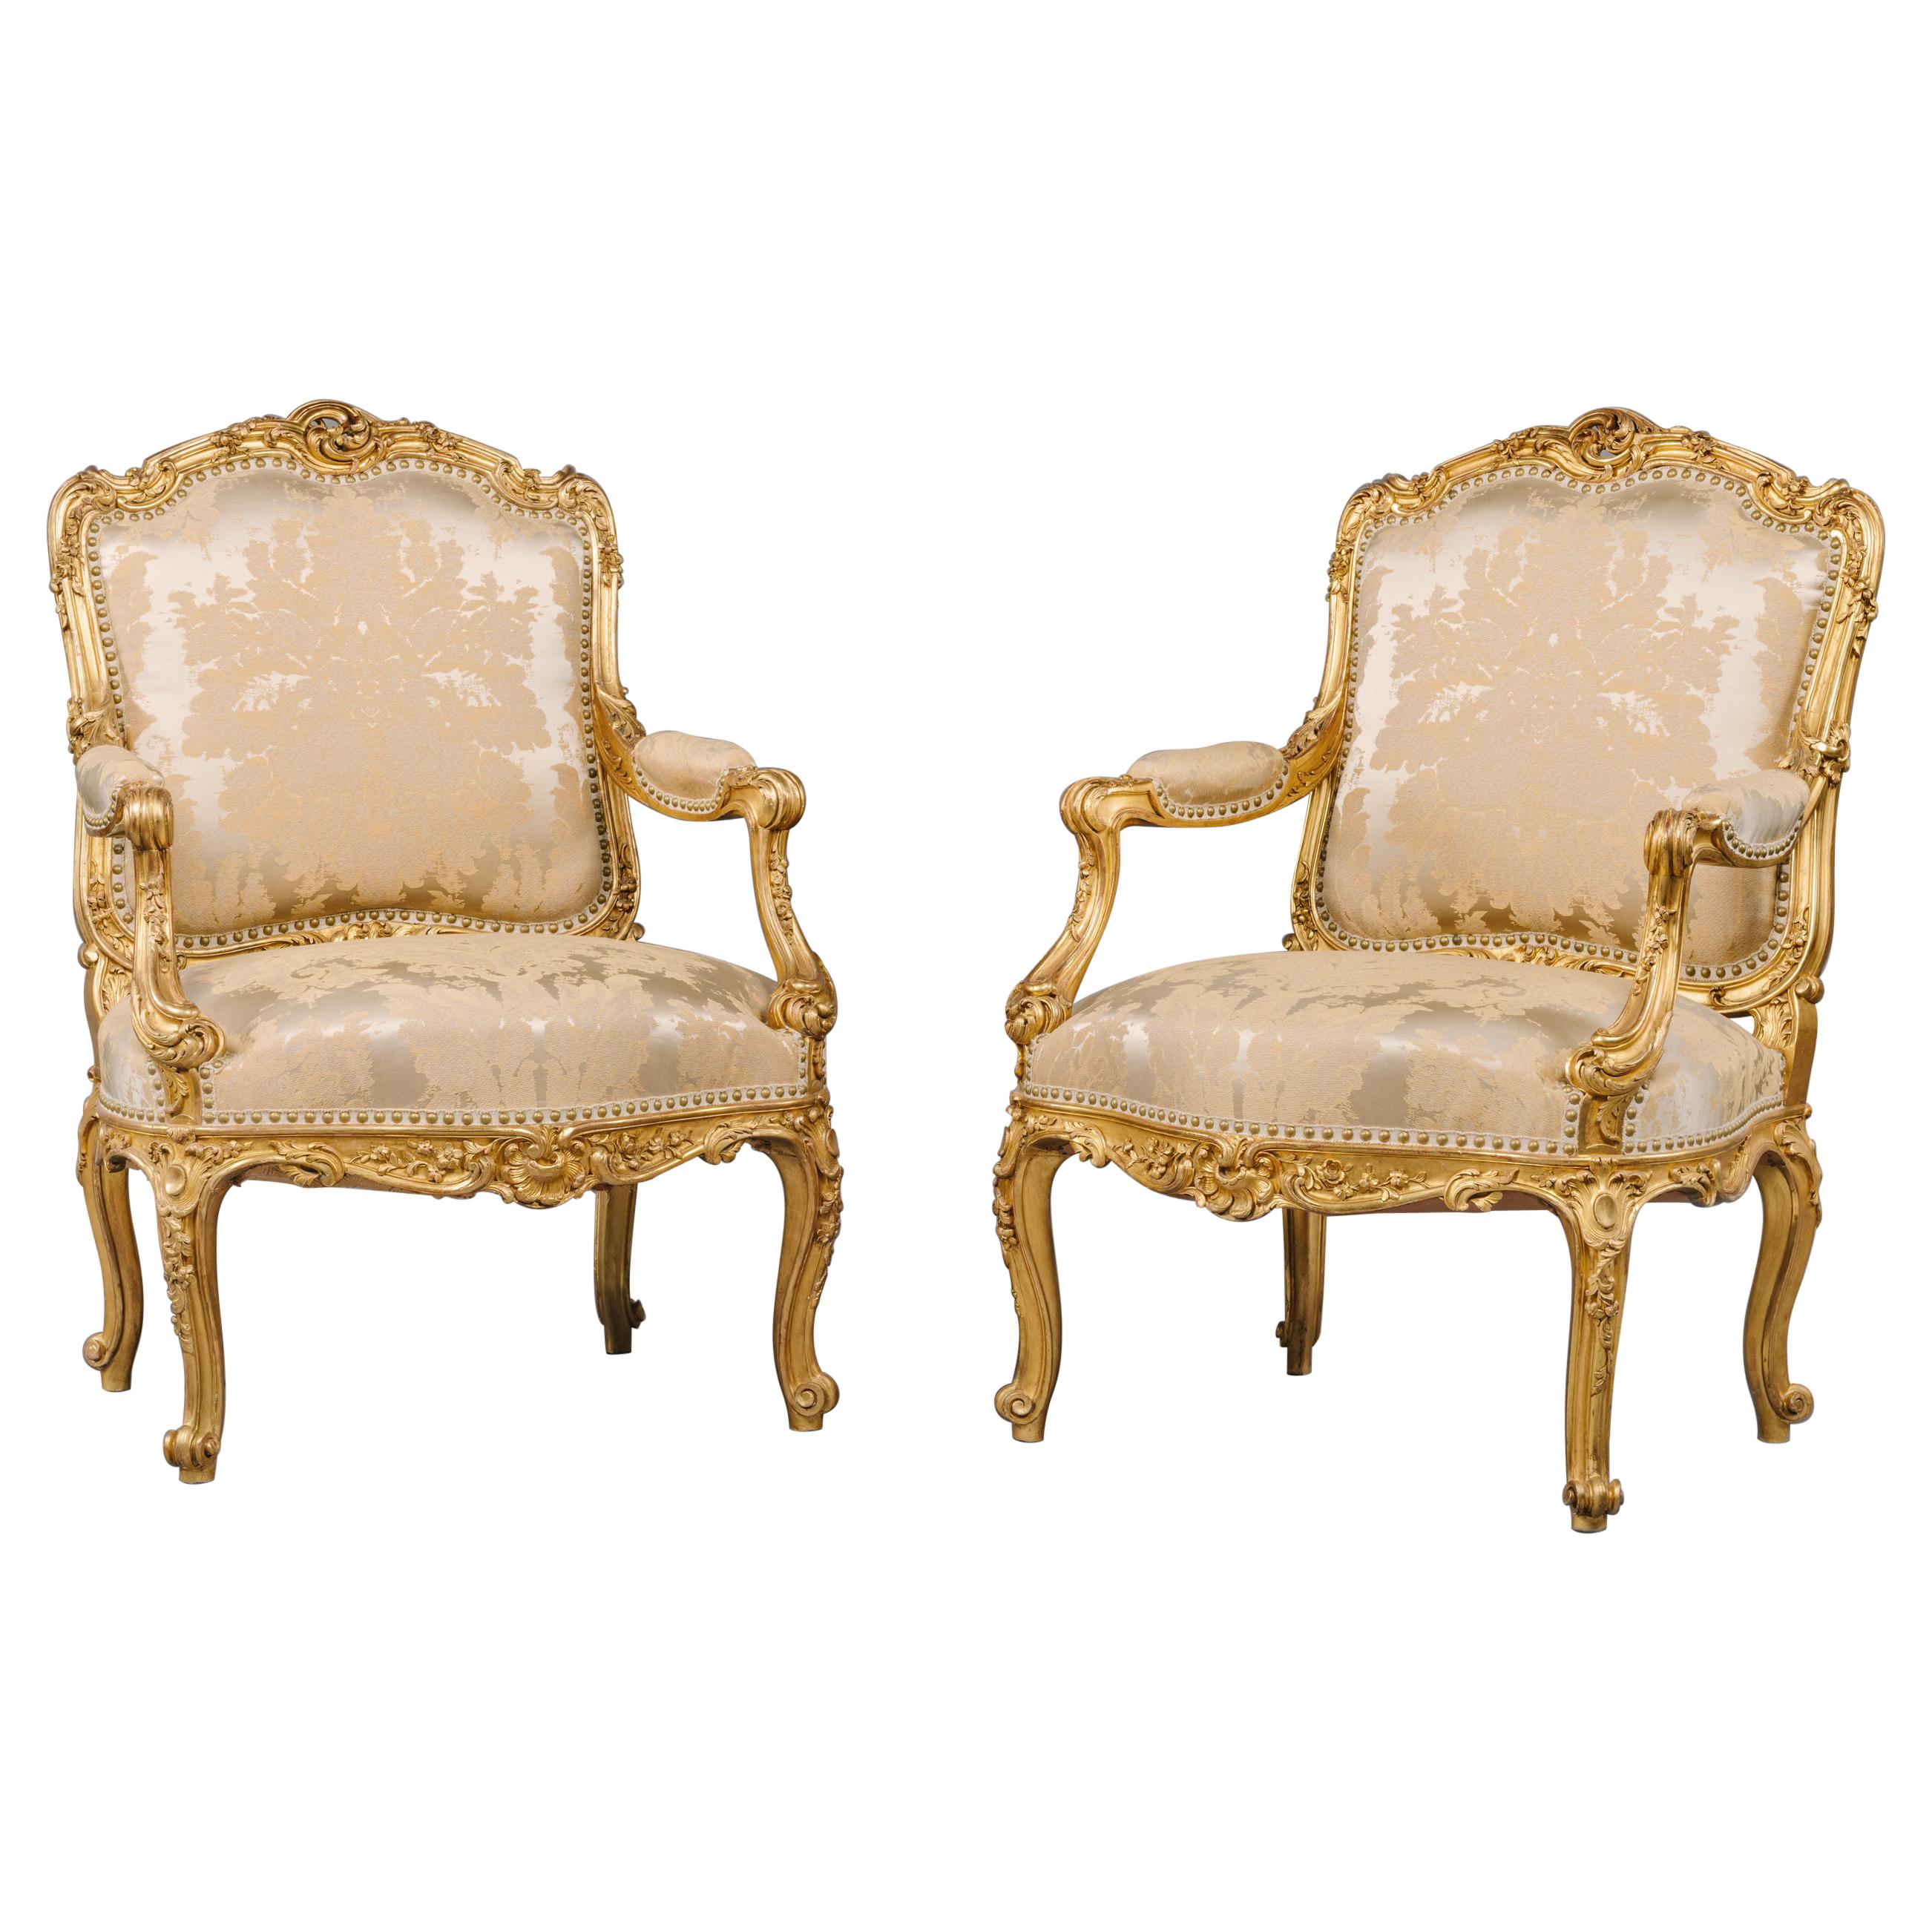 Pair of Louis XV Style Carved Giltwood Armchairs, by François Linke